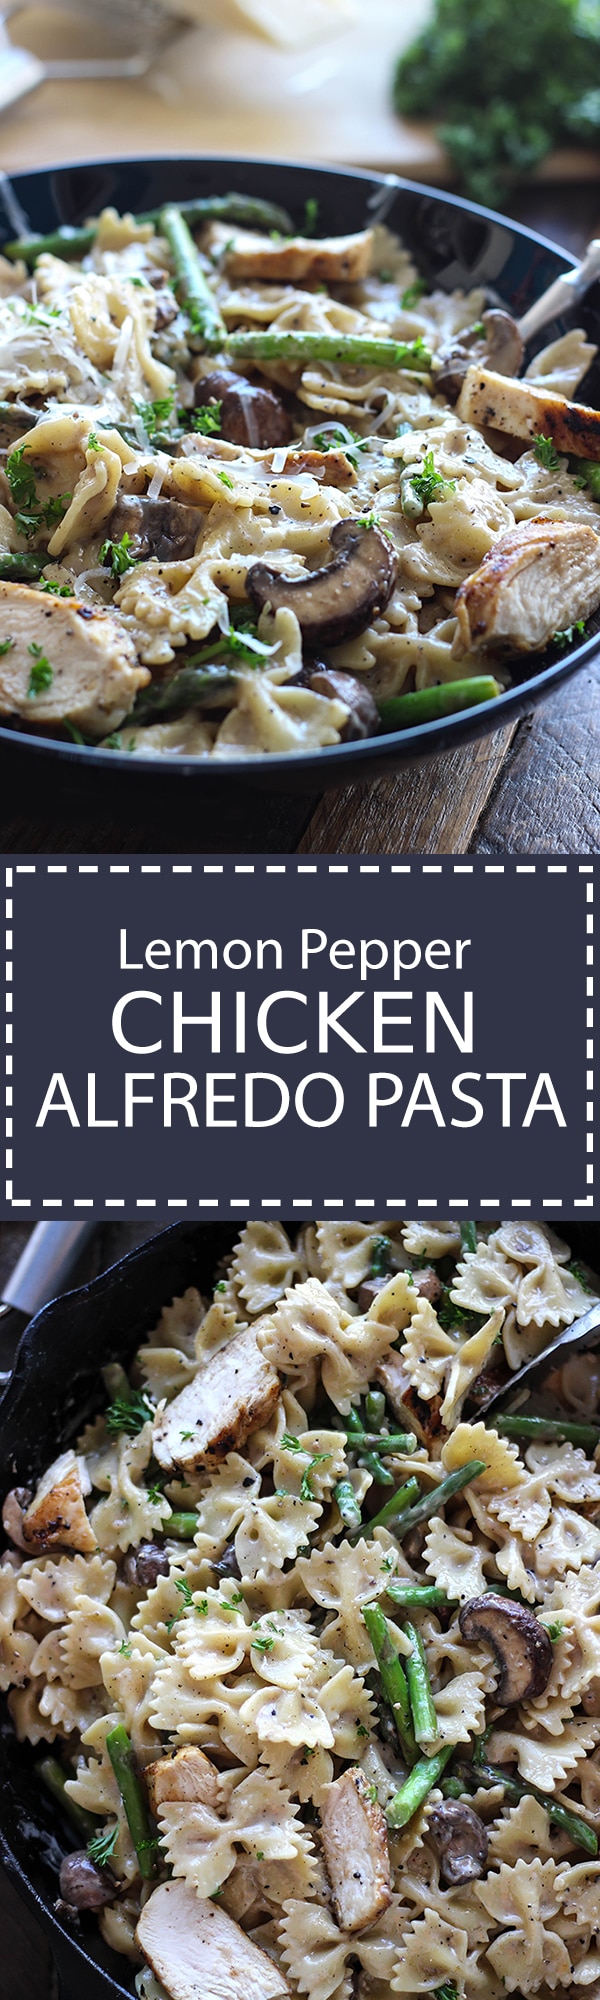 Use store-bought ingredients for this quick and easy lemon pepper chicken Alfredo pasta. Serves 6-8 and ready in 30 minutes.